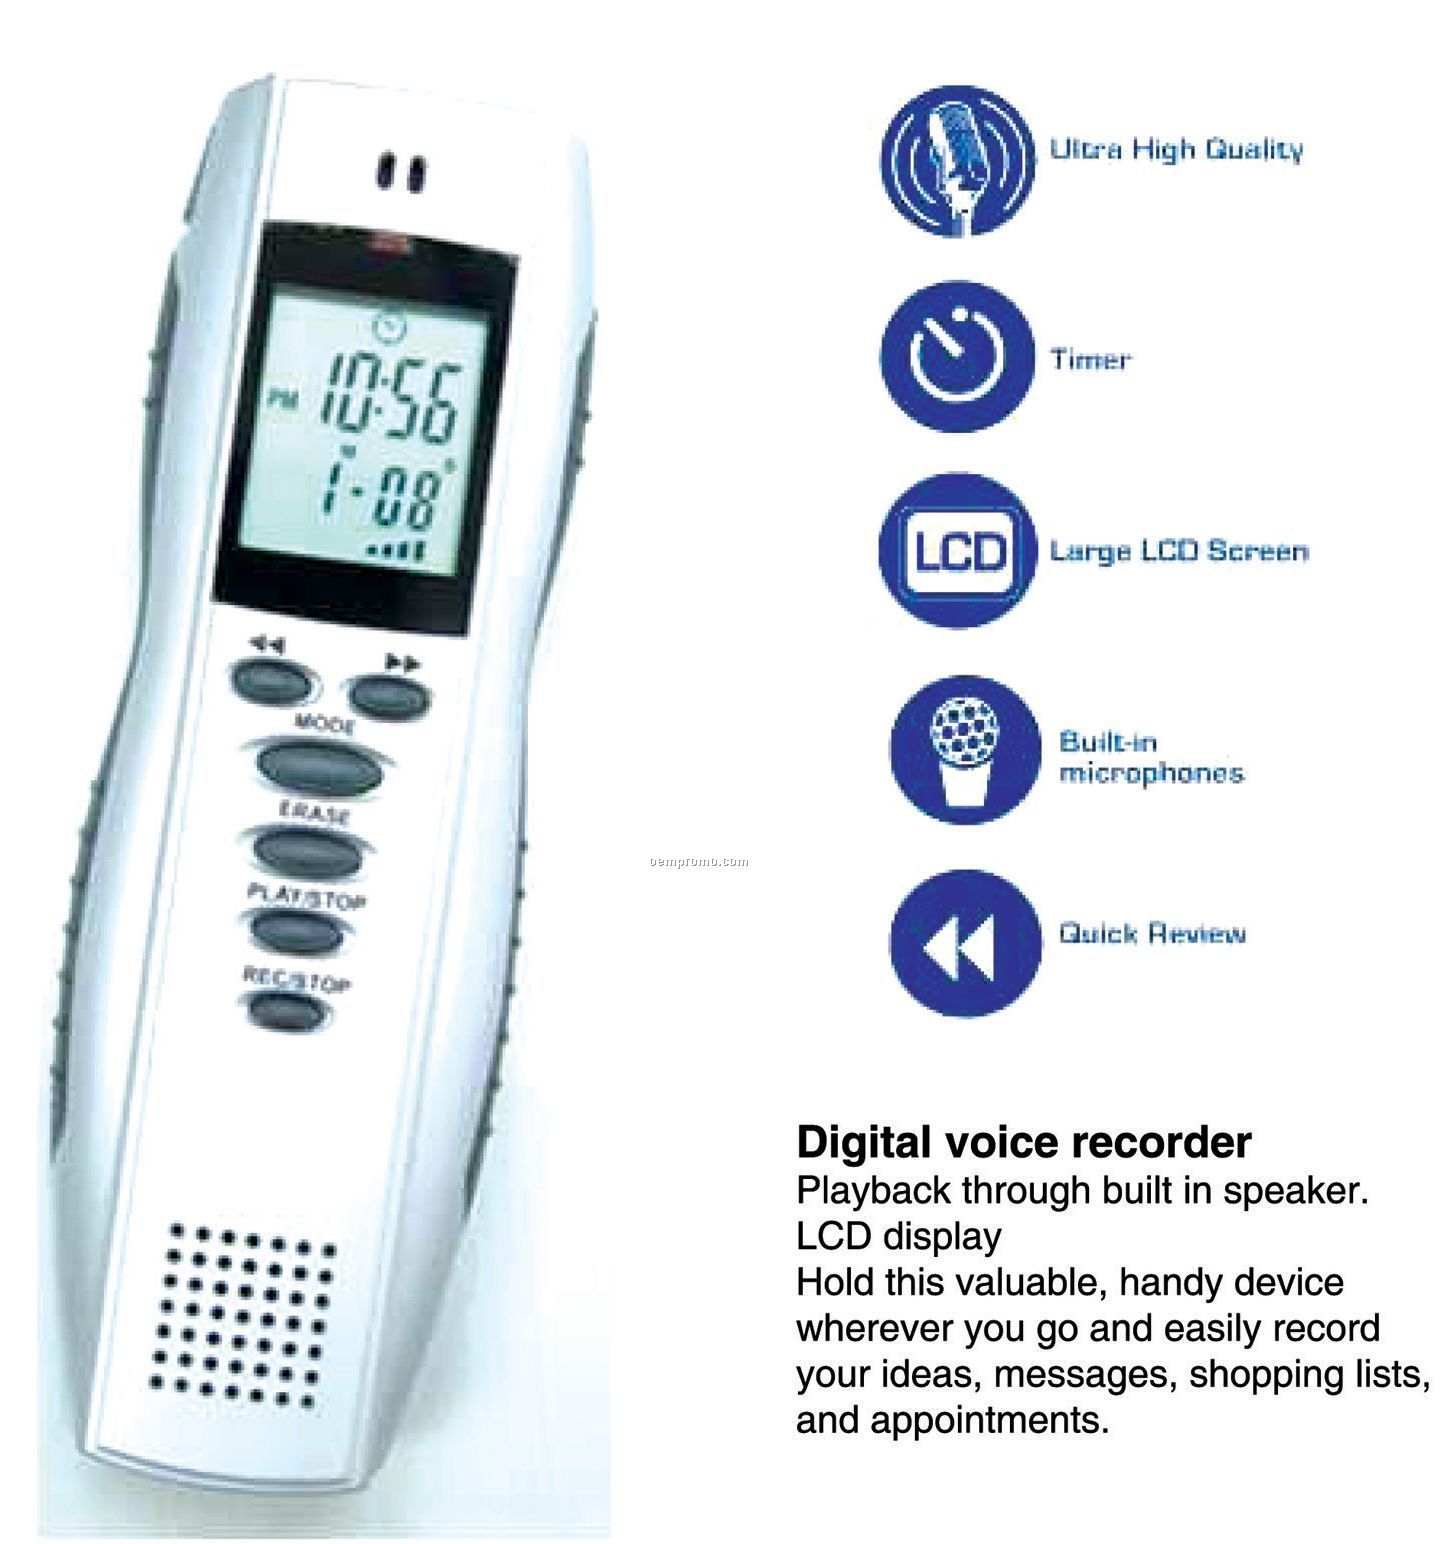 Digital Voice Recorder - 2.5 Minutes Recording Time